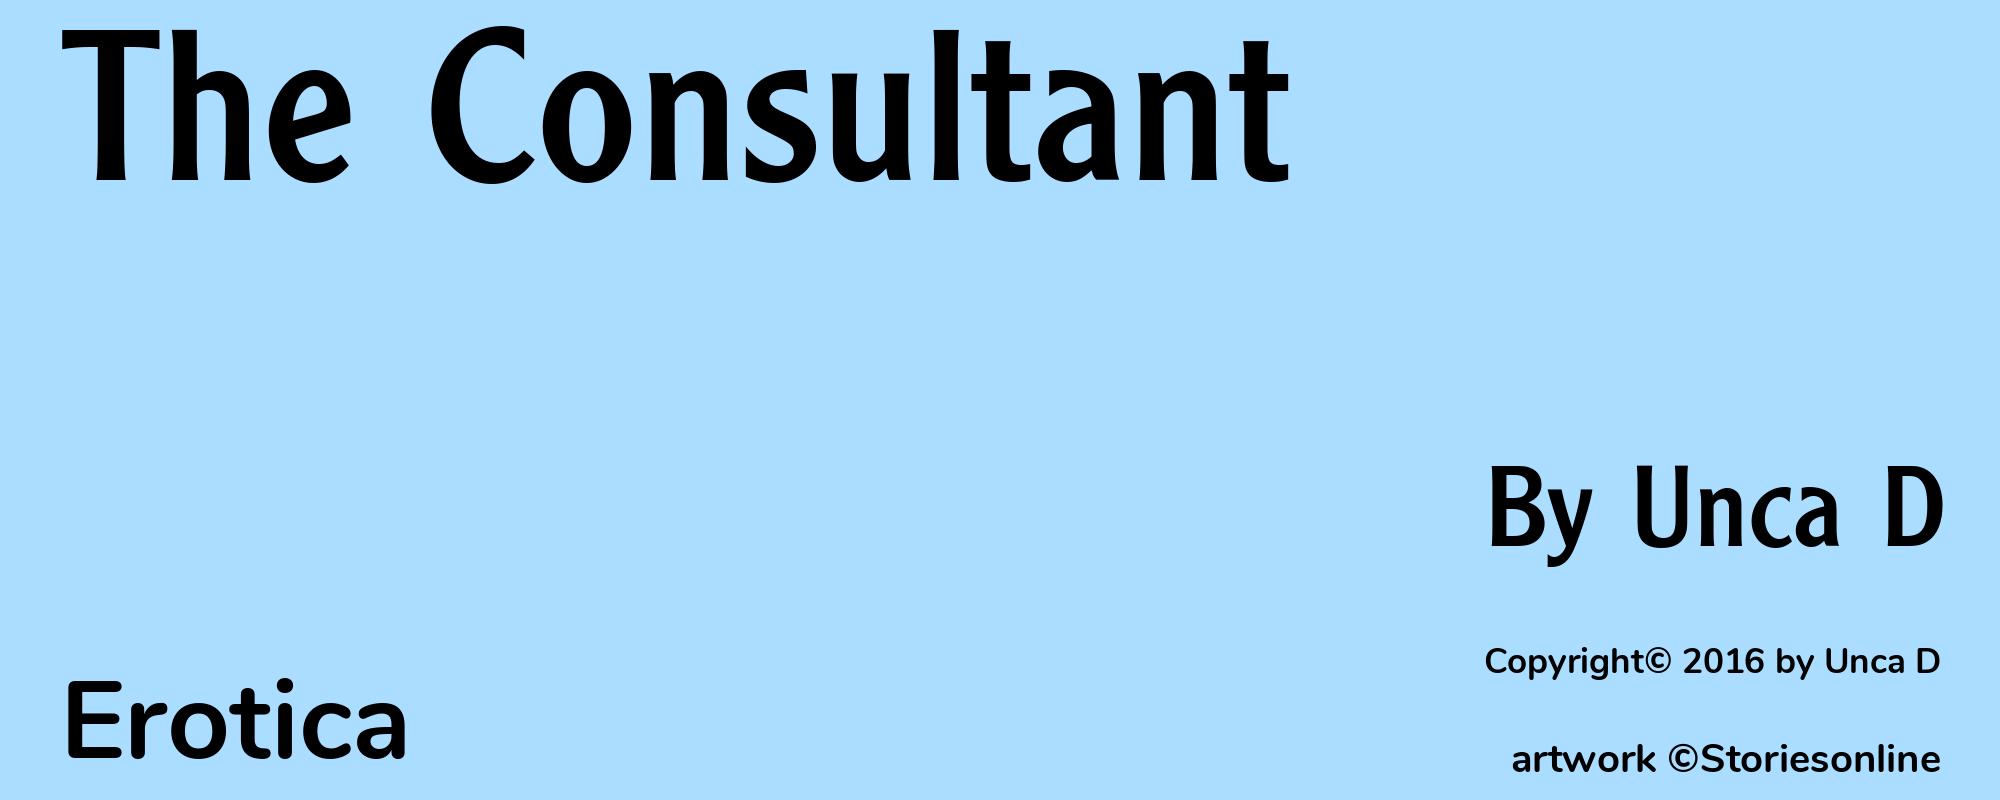 The Consultant - Cover